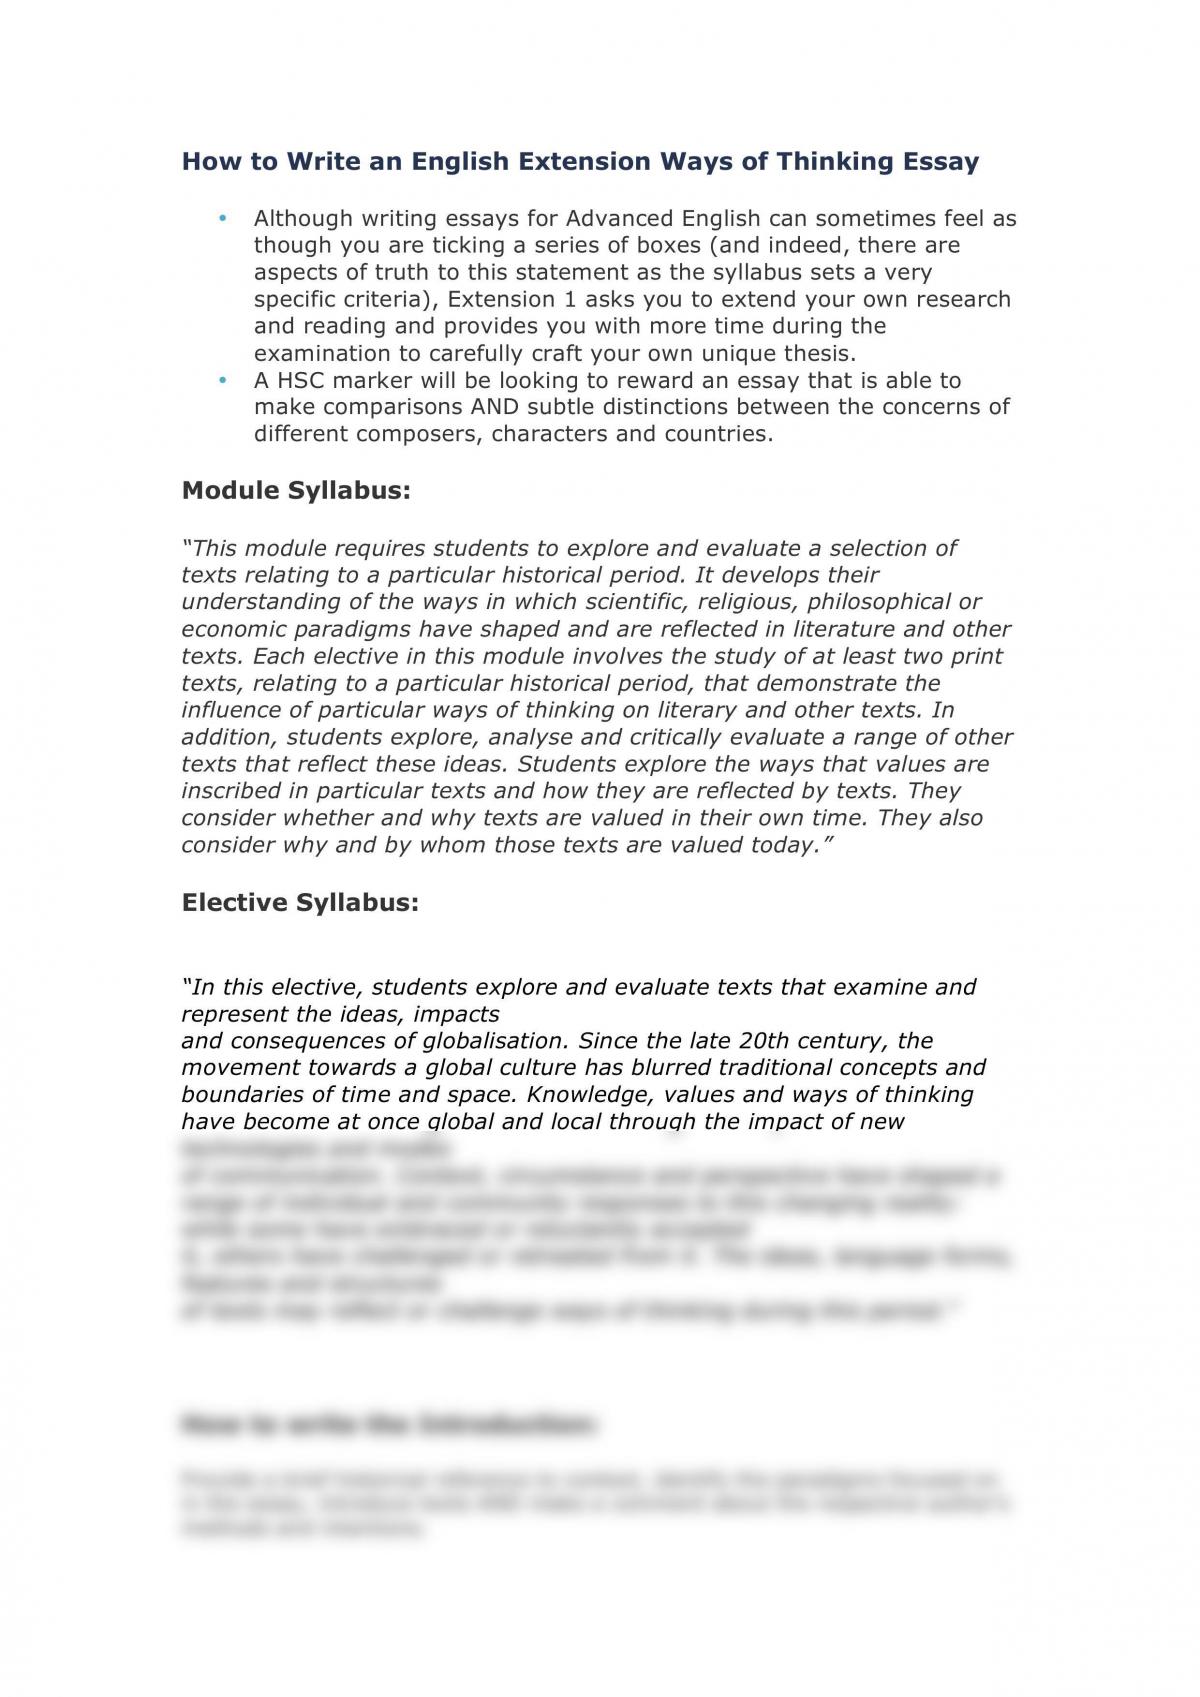 Ways of Thinking Essay Structure  - Page 1